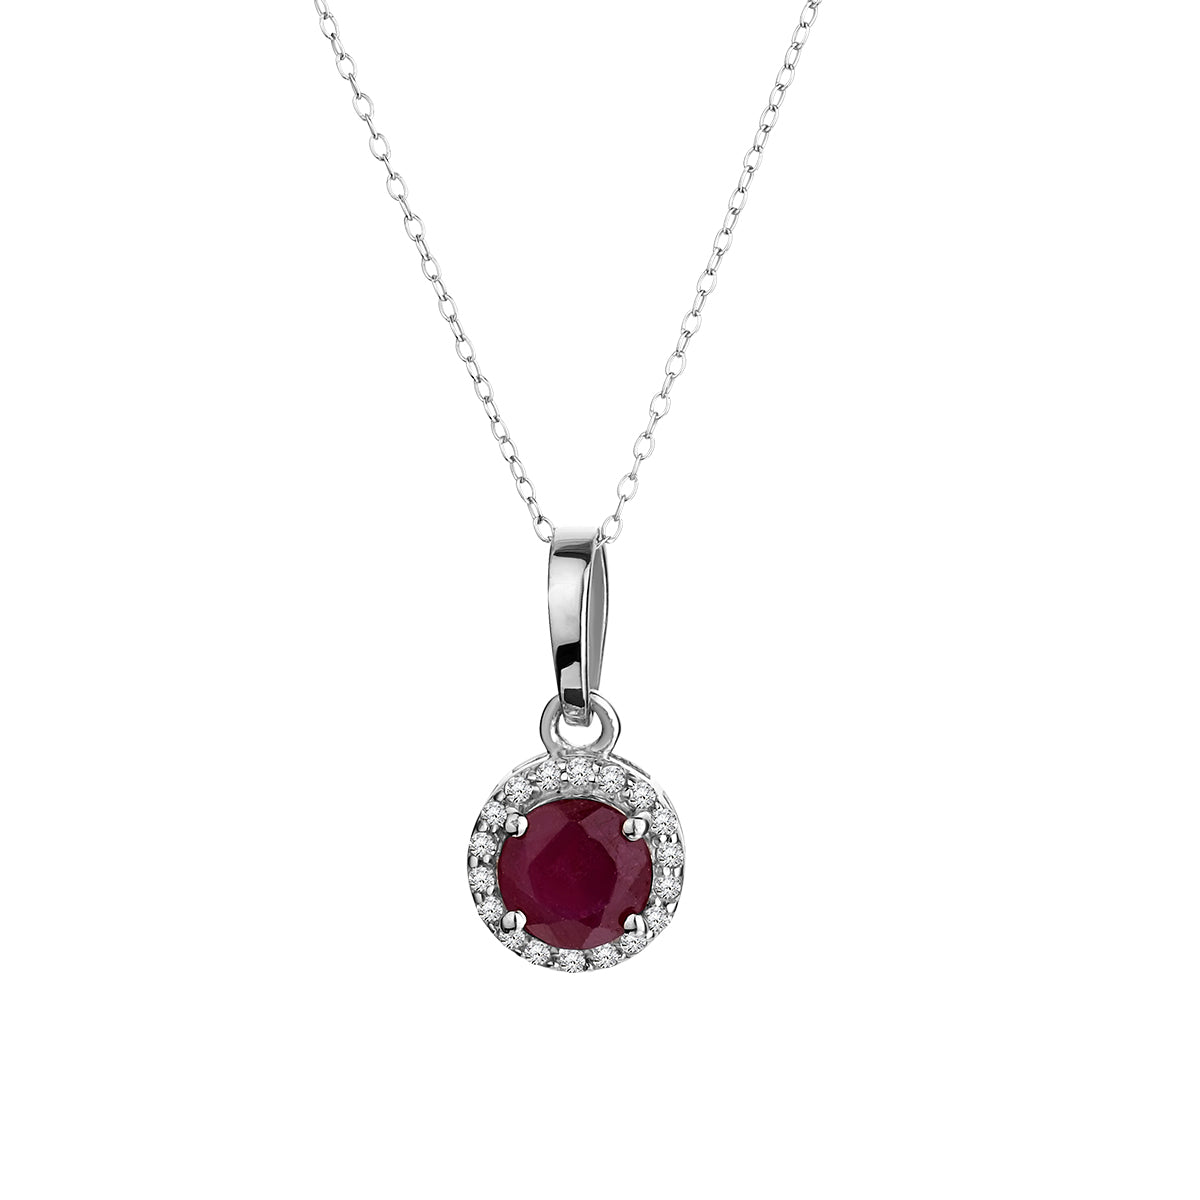 Genuine Ruby & White Zirconia Pendant,  Sterling Silver. Necklaces and Pendants. Griffin Jewellery Designs. 